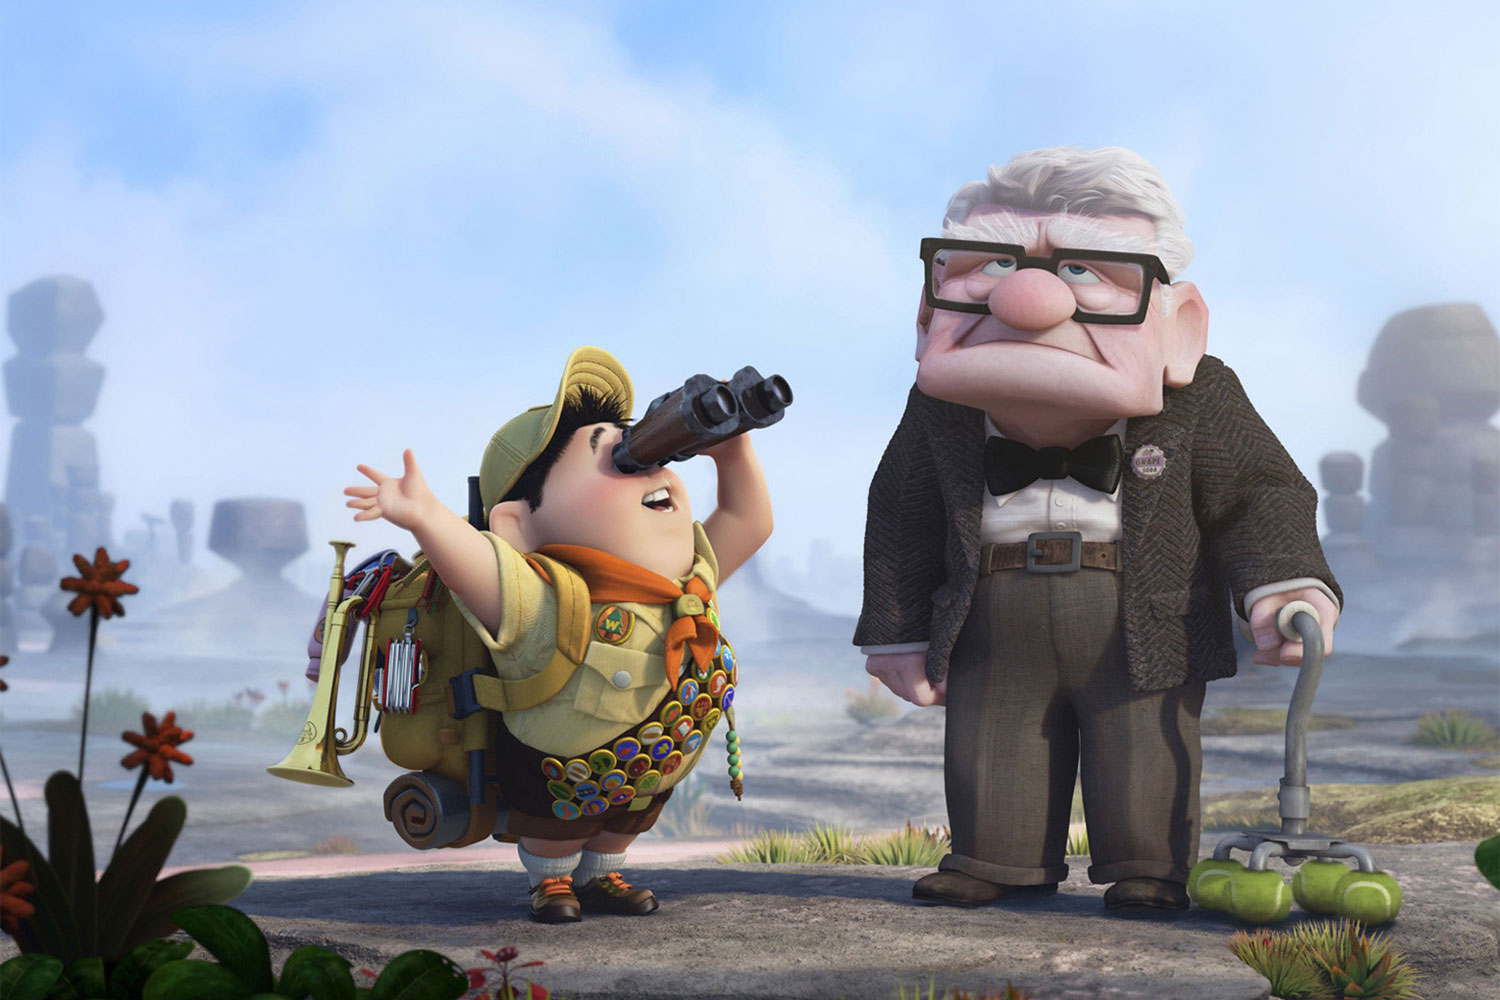 The 10 best Pixar movies of all time, ranked - The Manual